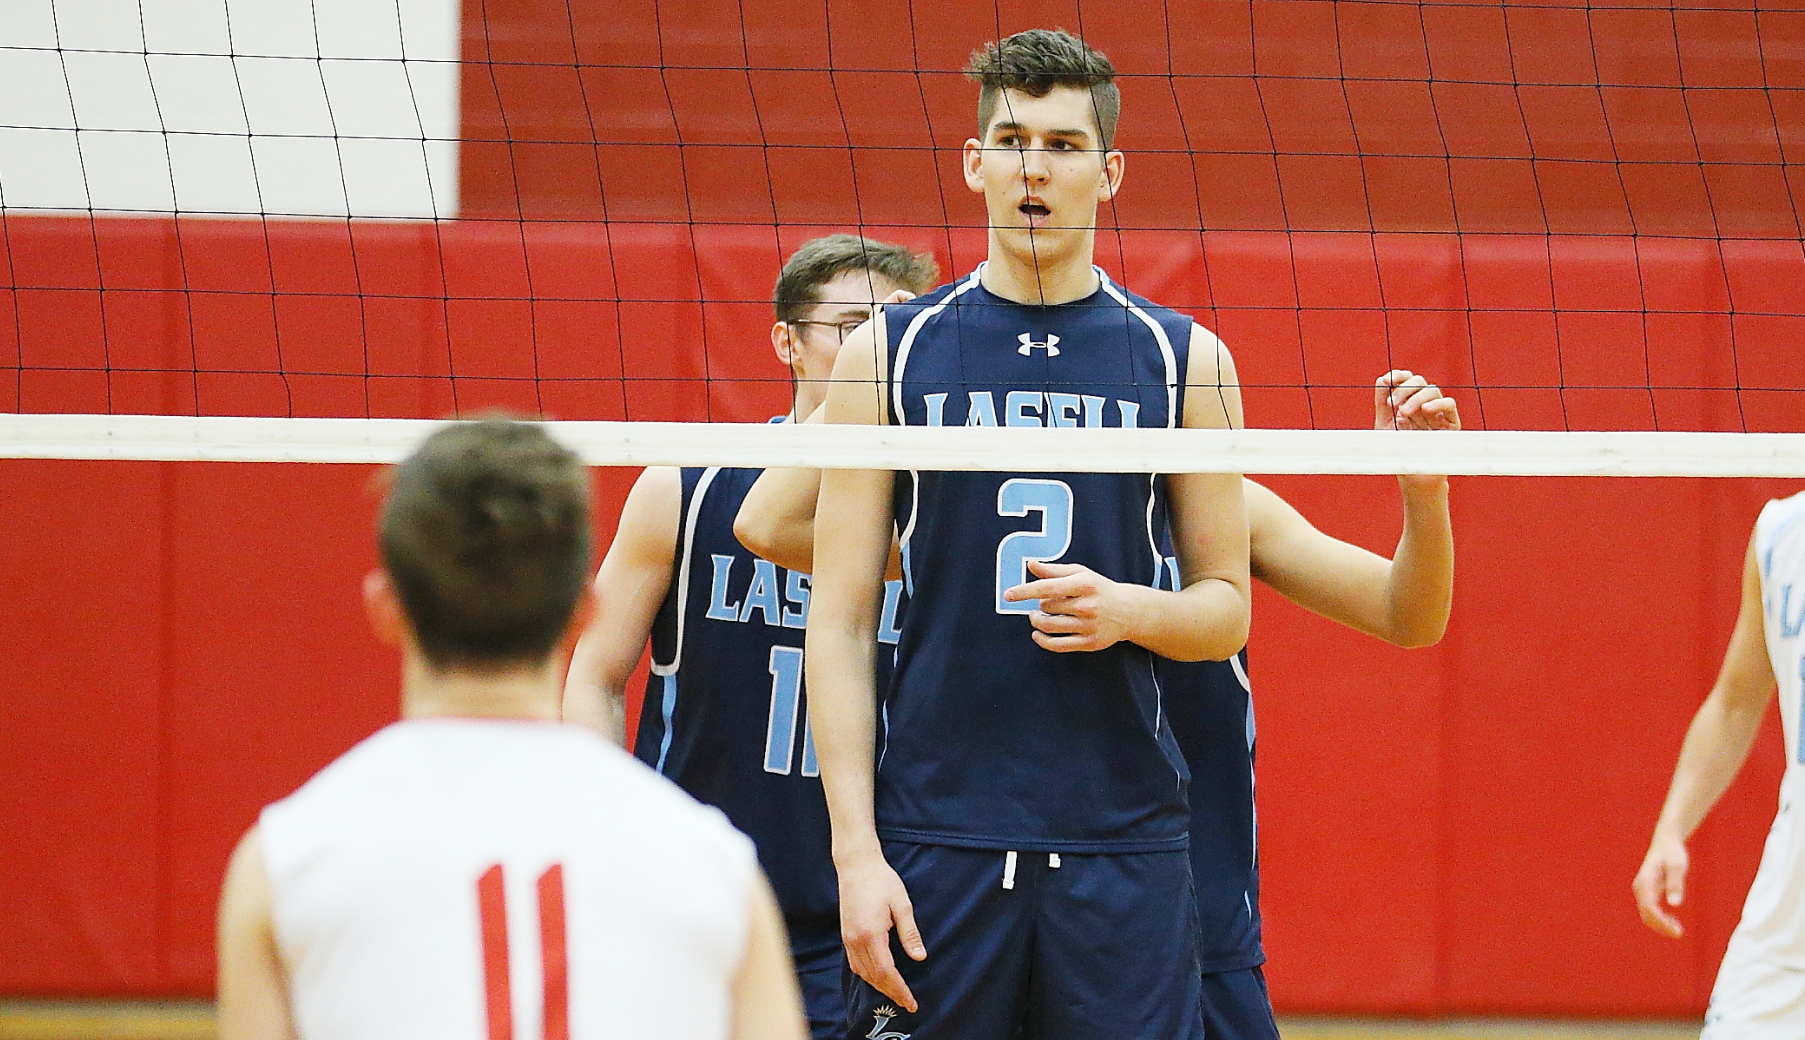 Men's Volleyball: Lasers grab first two wins of the season at the SUNY Poly Invitational